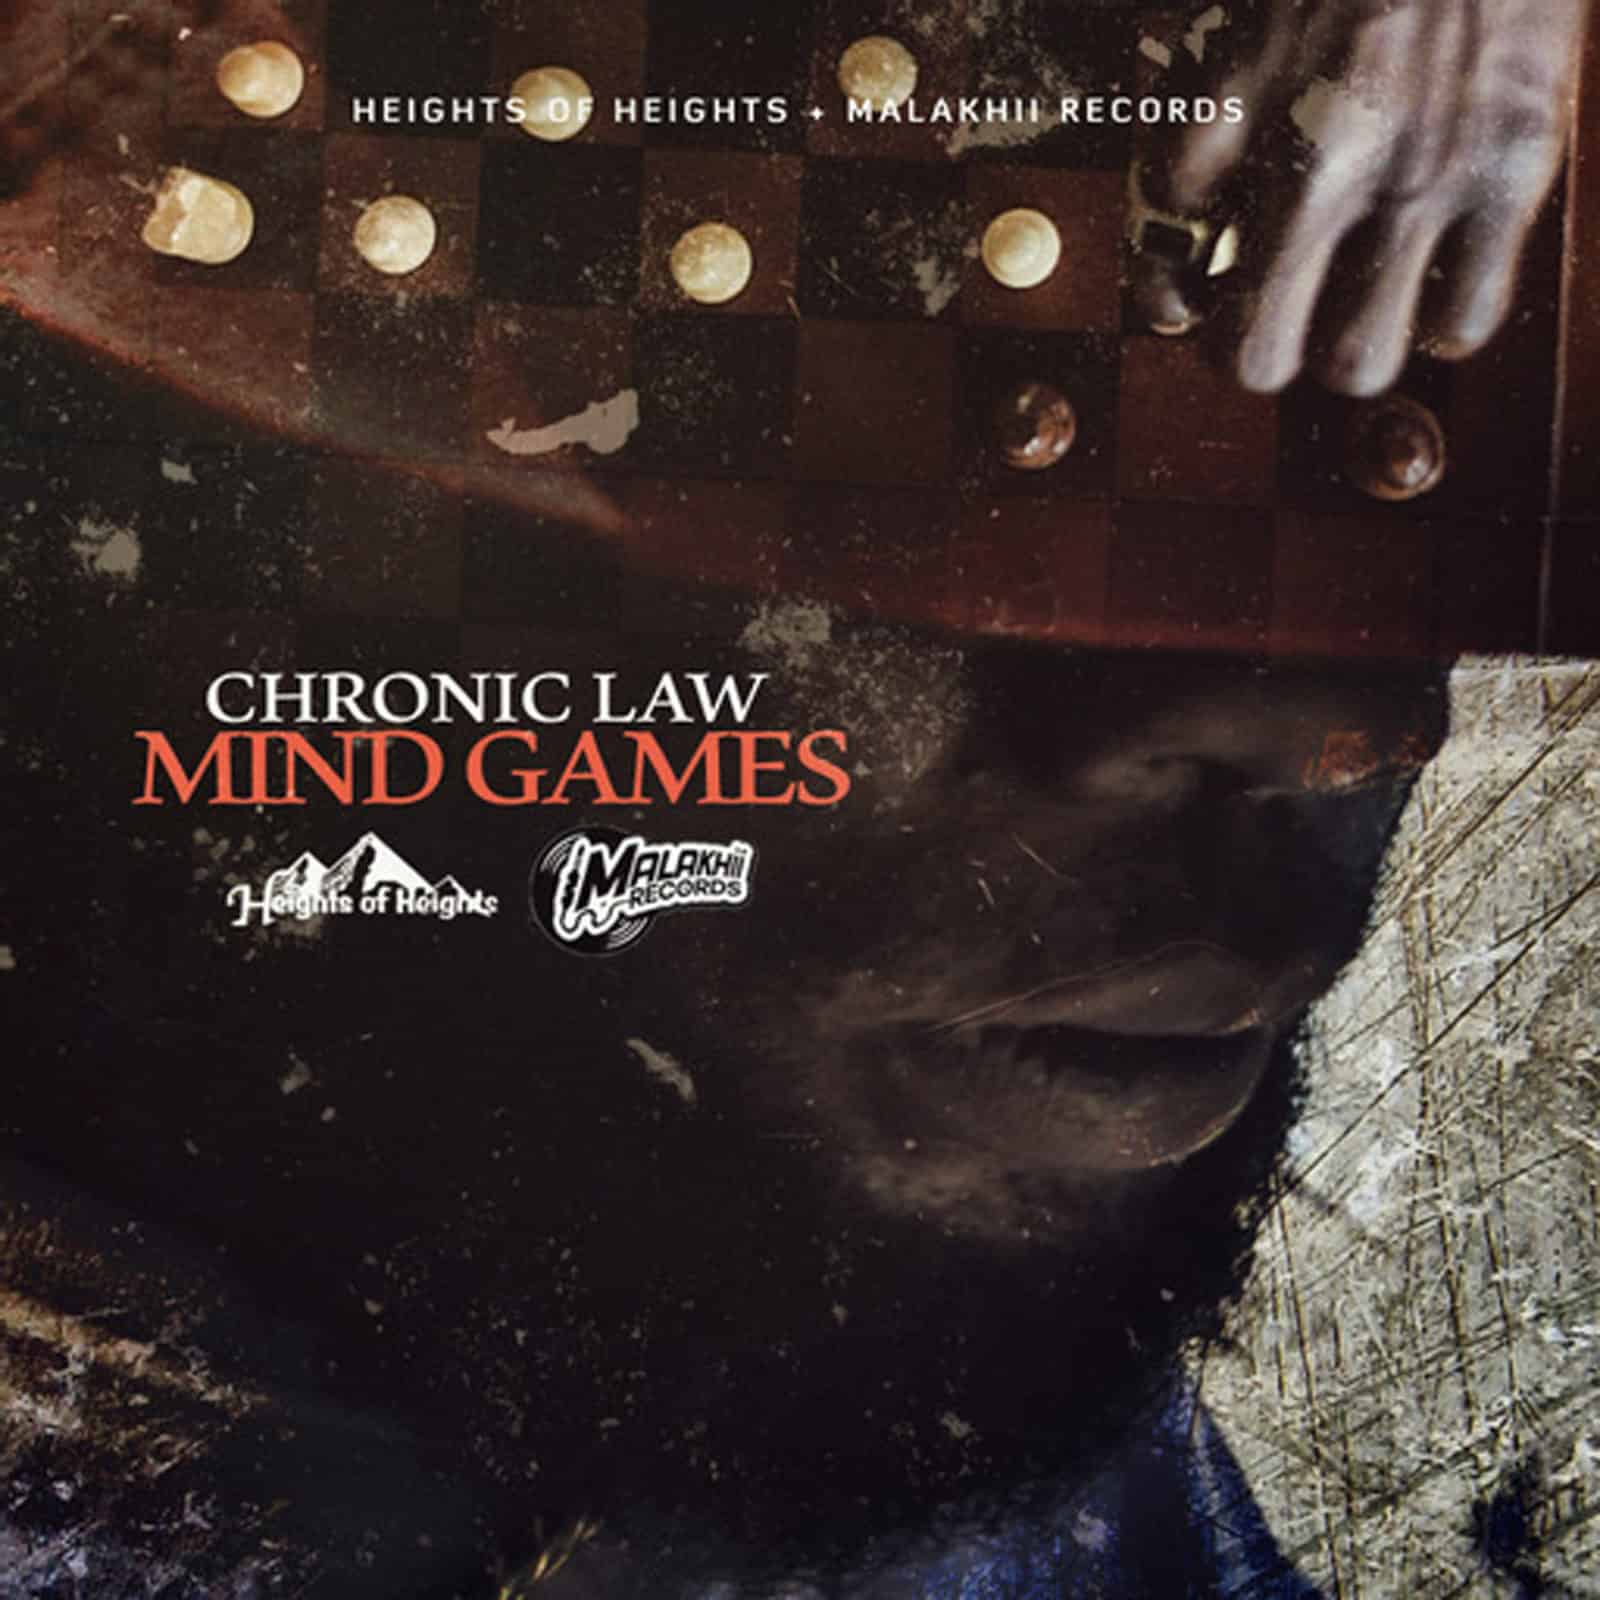 Chronic Law - Mind Games - Heights of Heights Records / Malakhii Records